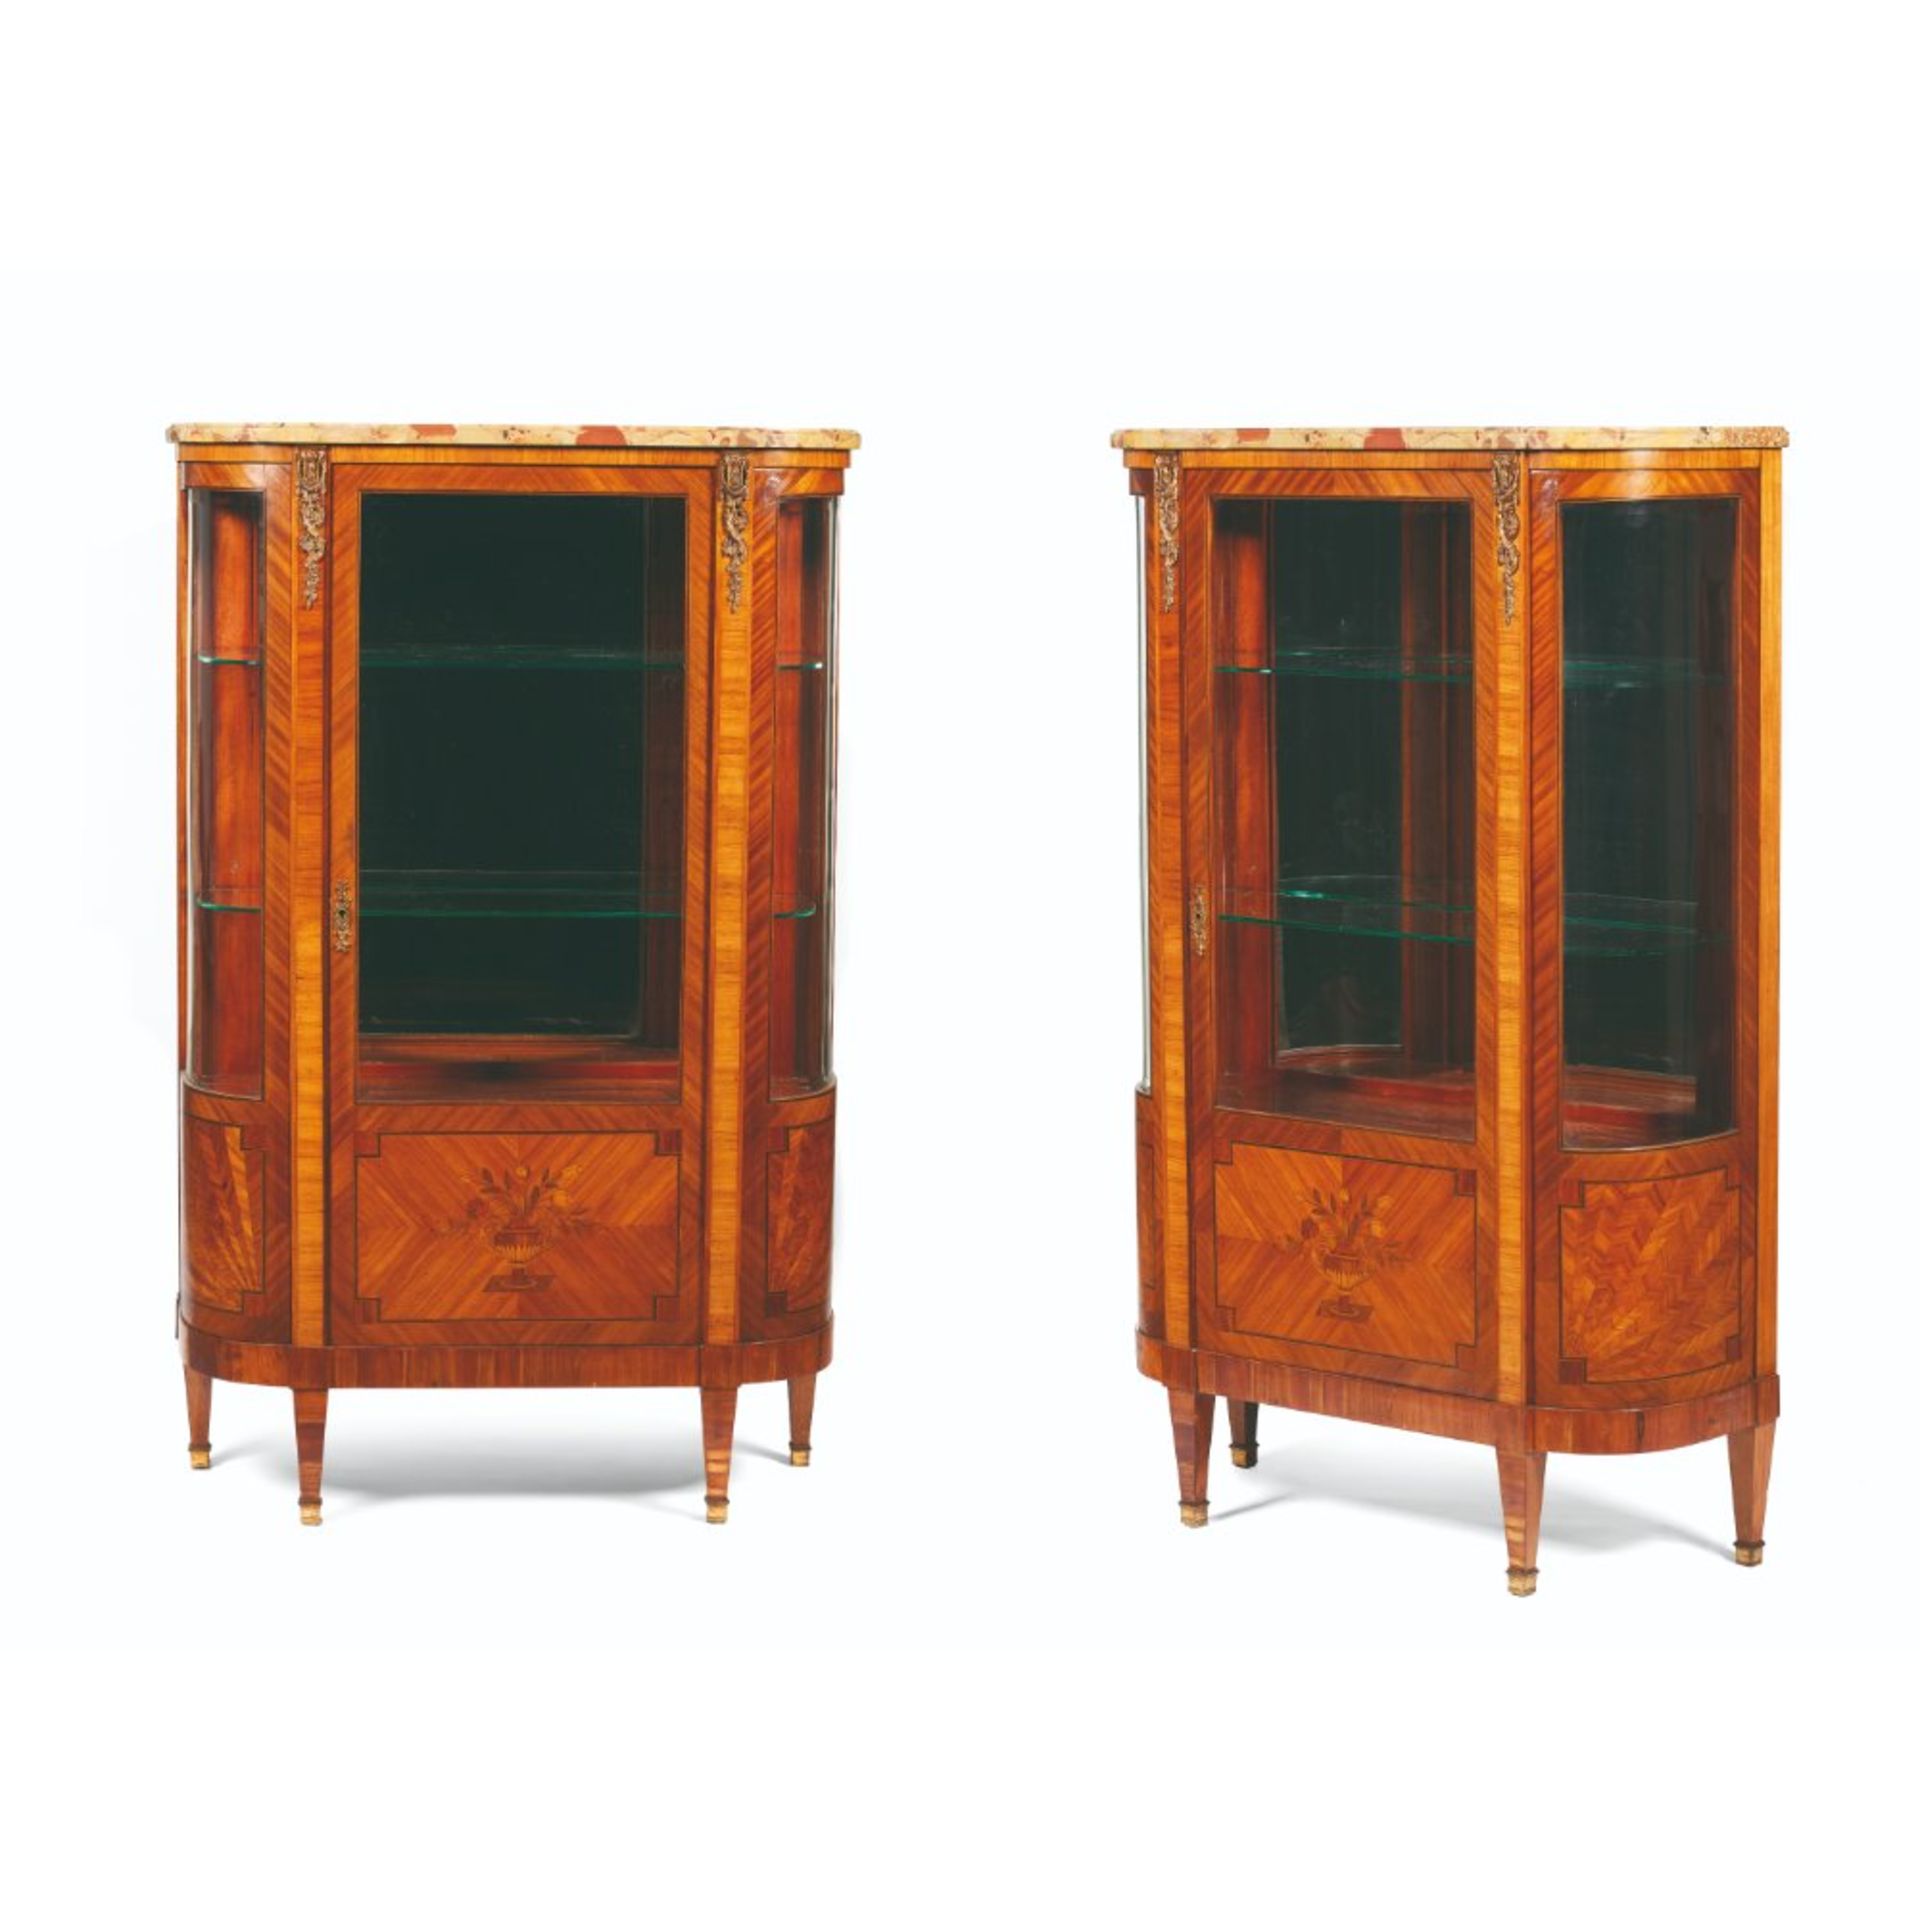 A Pair of Louis XVI style display cabinets